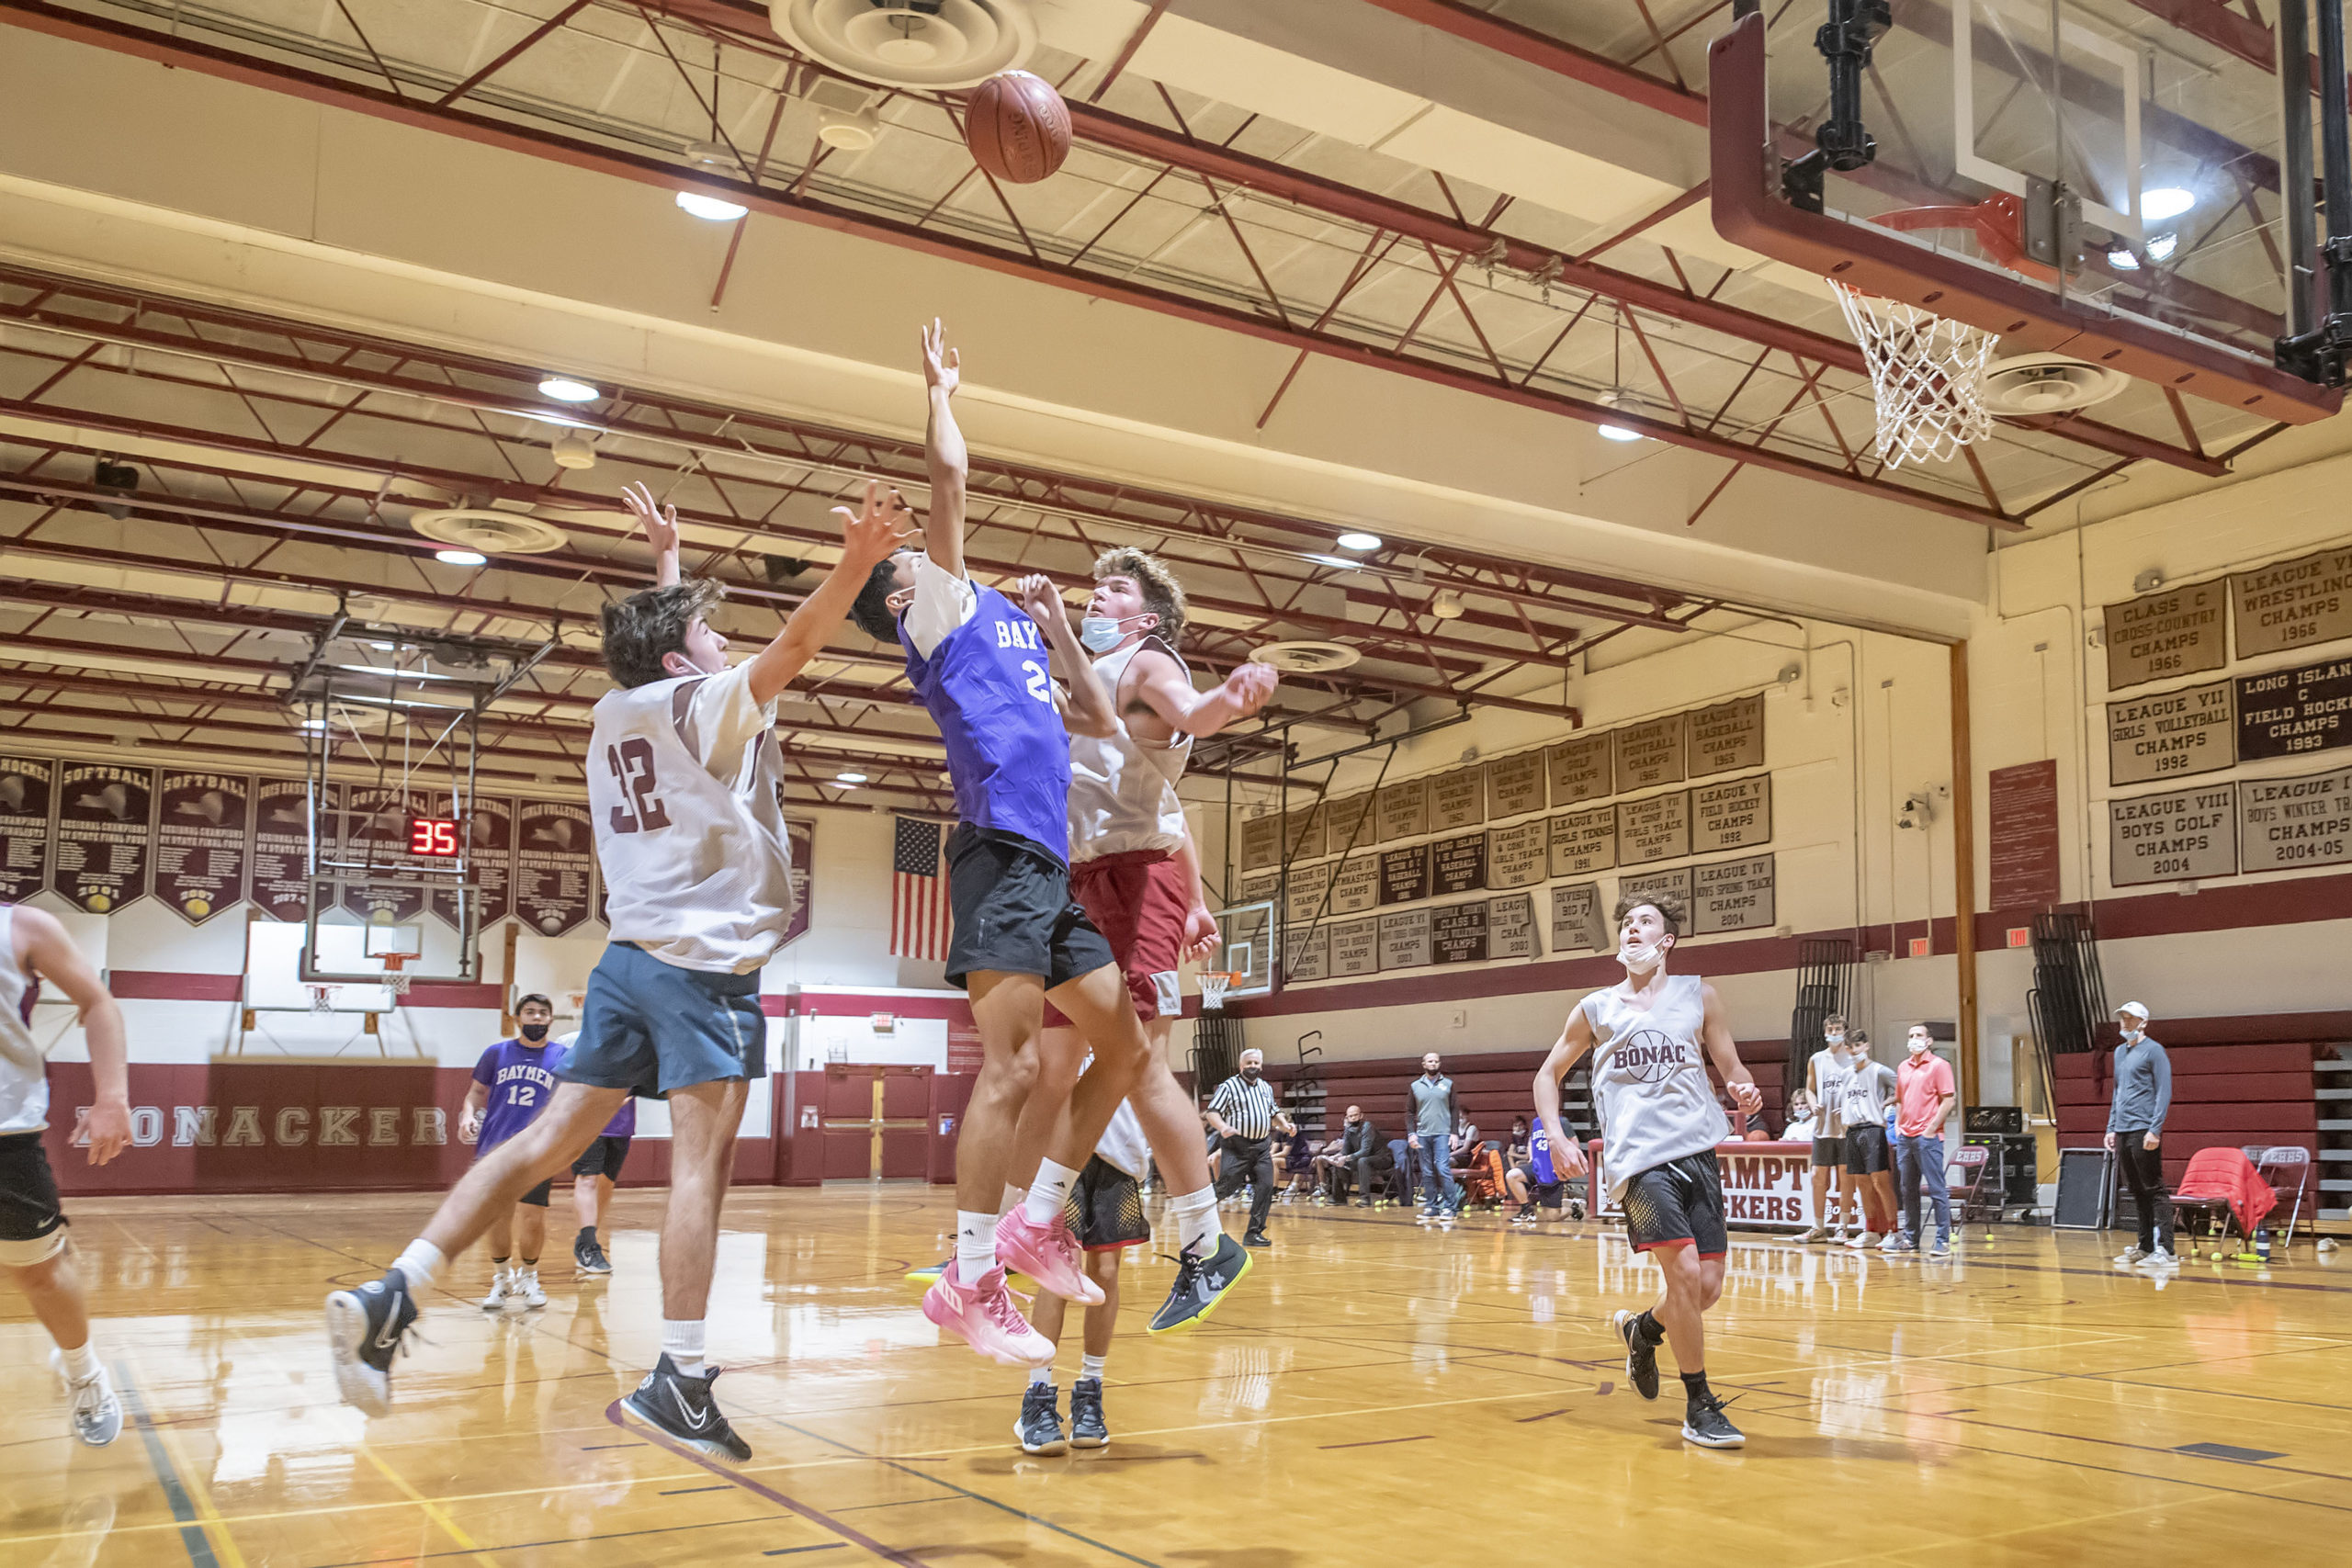 East Hampton boys basketball hosted Hampton Bays in a scrimmage on Saturday morning.